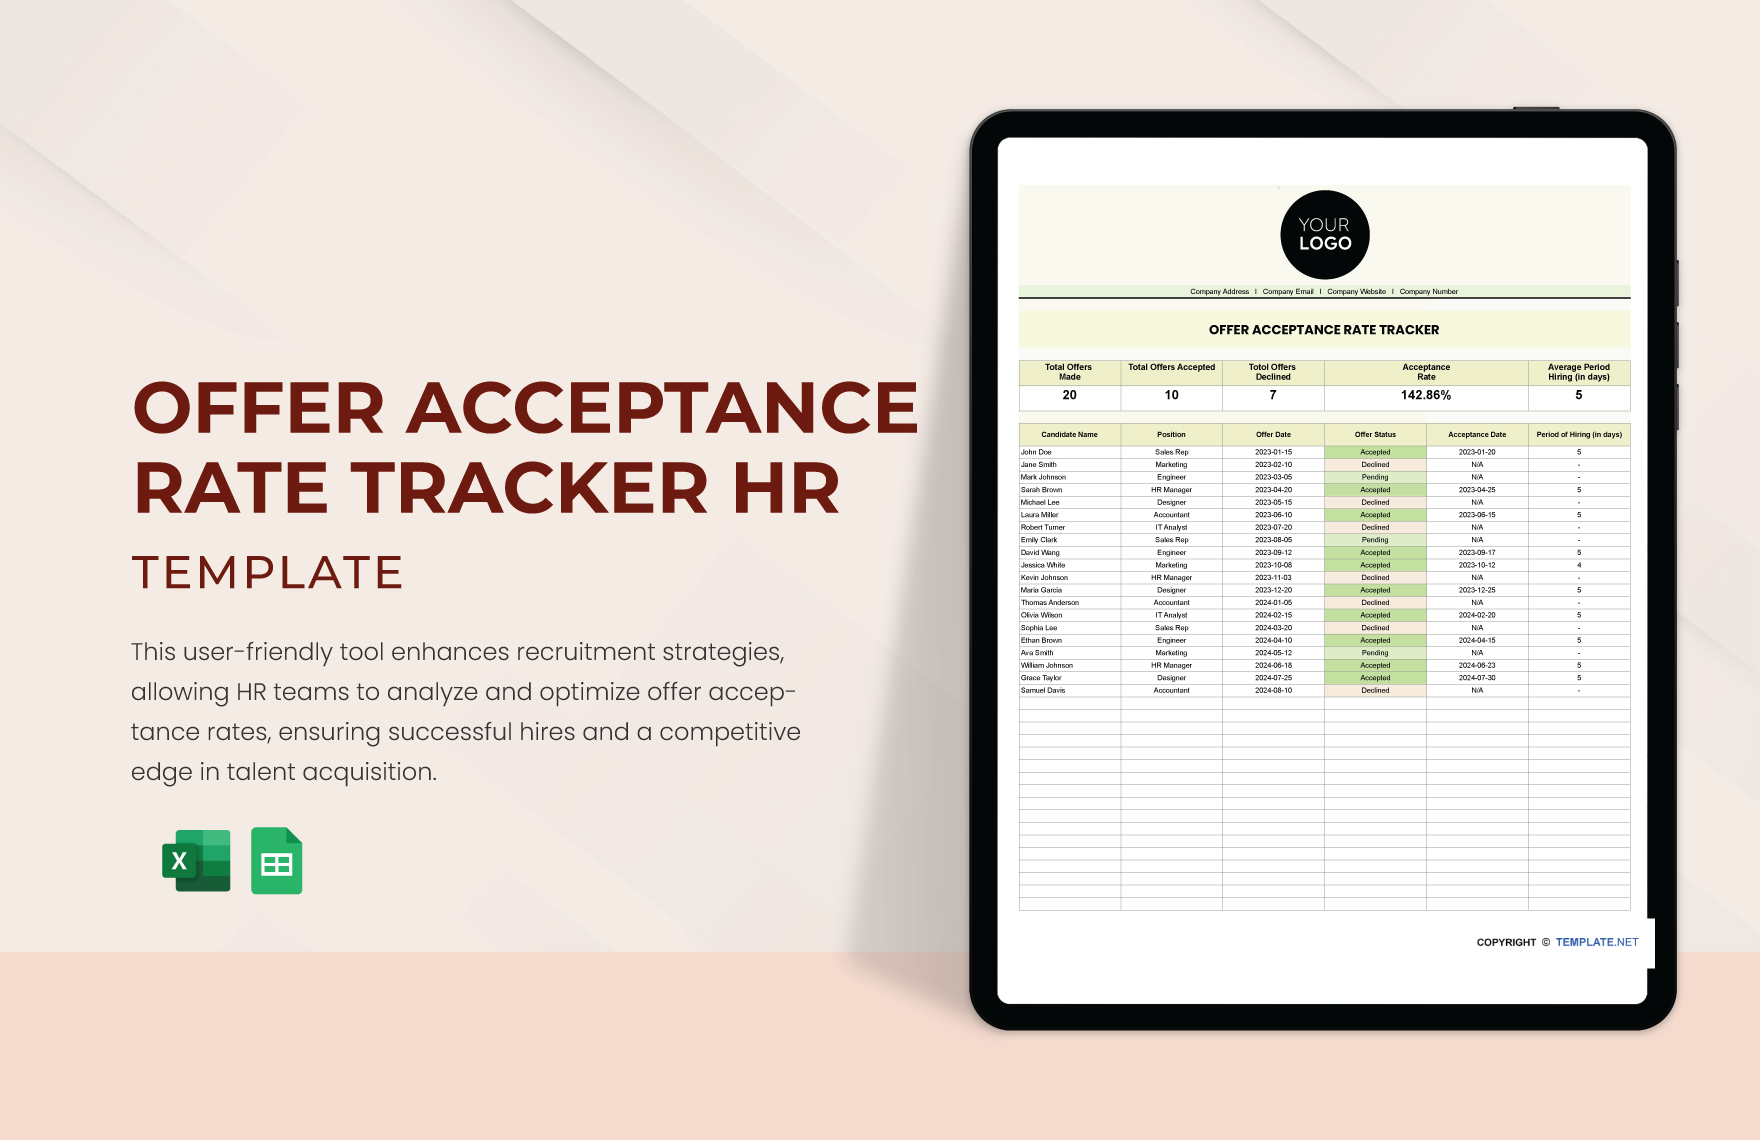 Offer Acceptance Rate Tracker HR Template